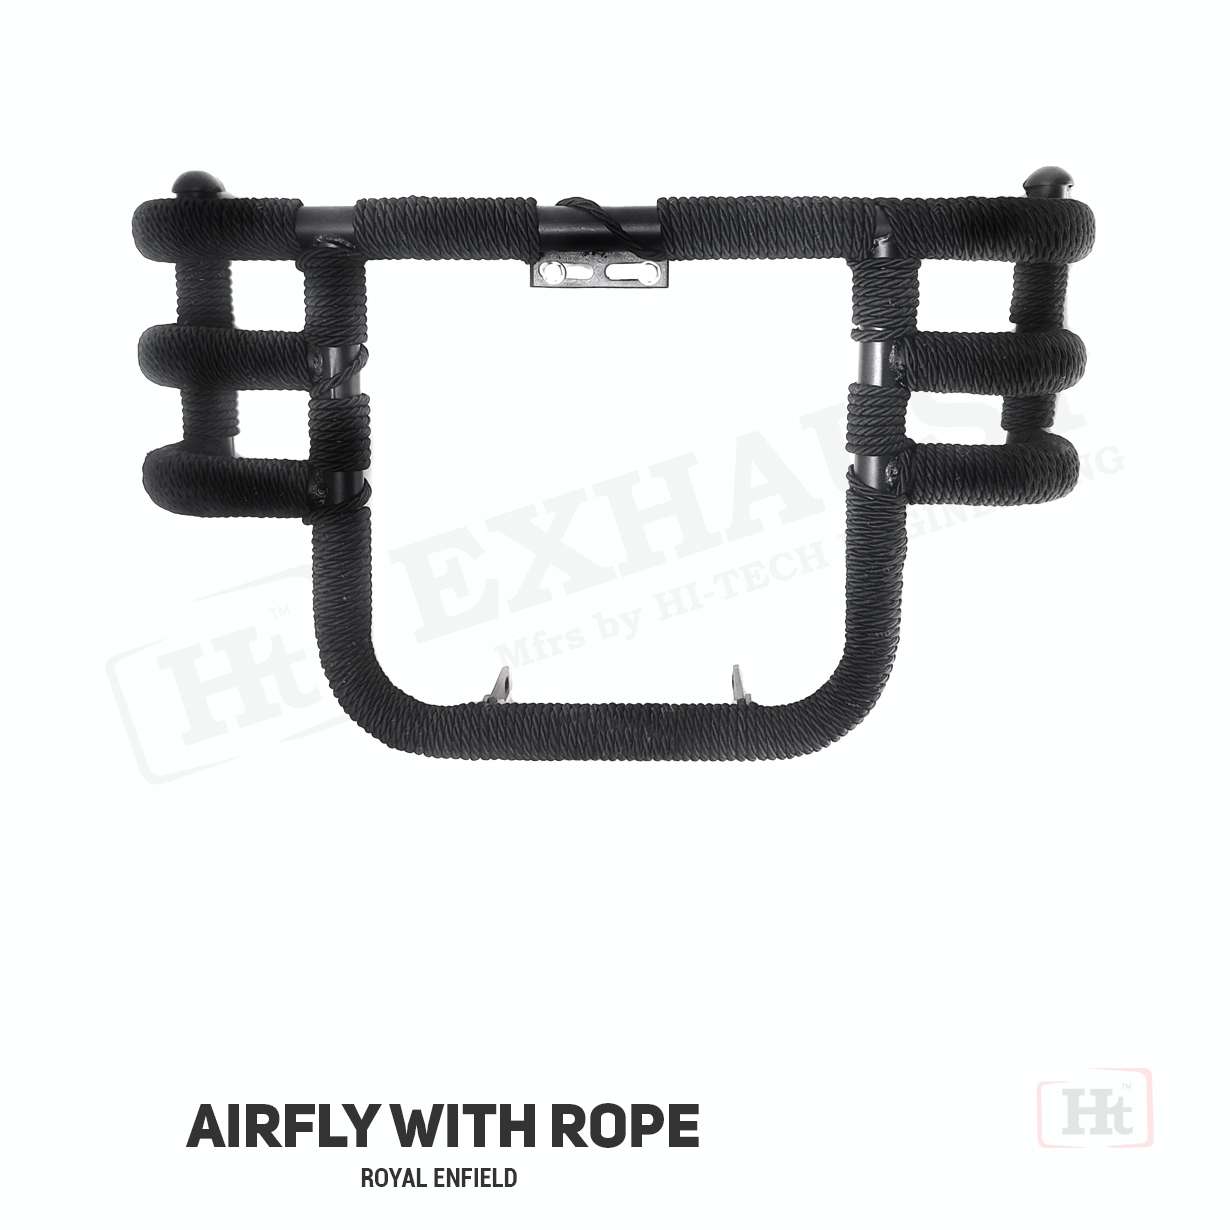 HT-Meteor Airfly with rope